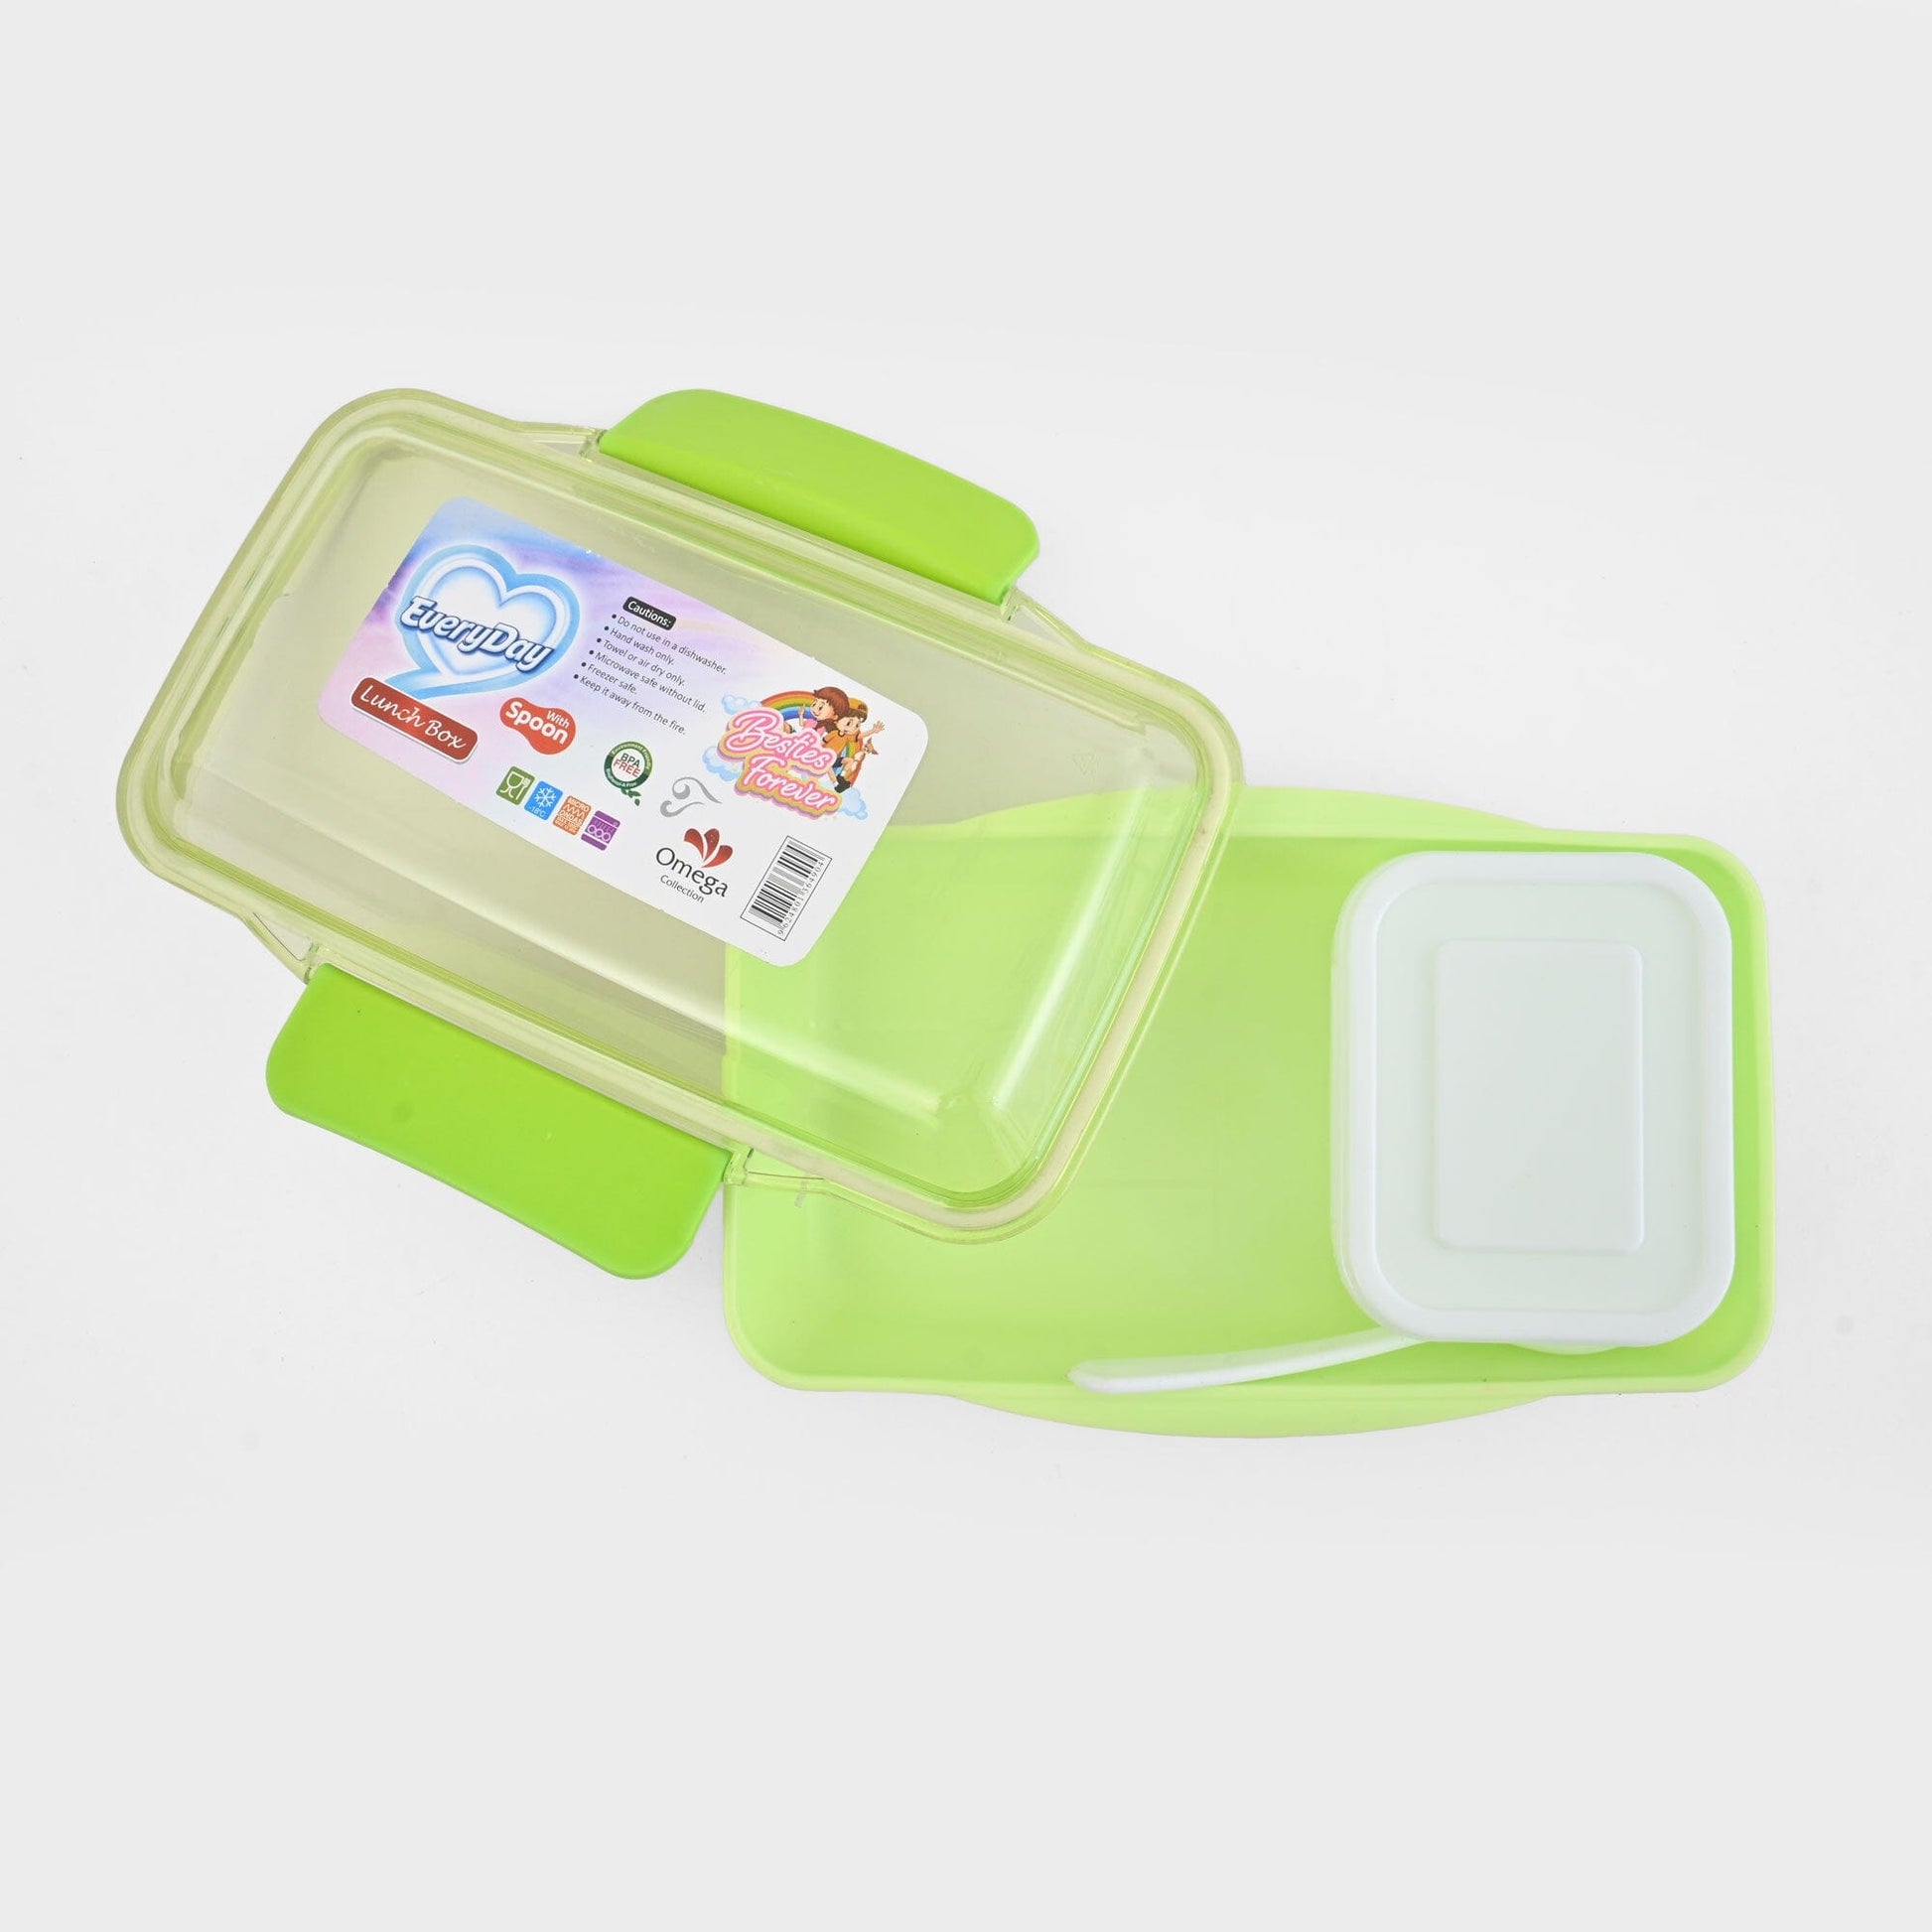 Everyday Kid's Besties Forever Lunch Box With Removable Sticker Crockery RAM Parrot 